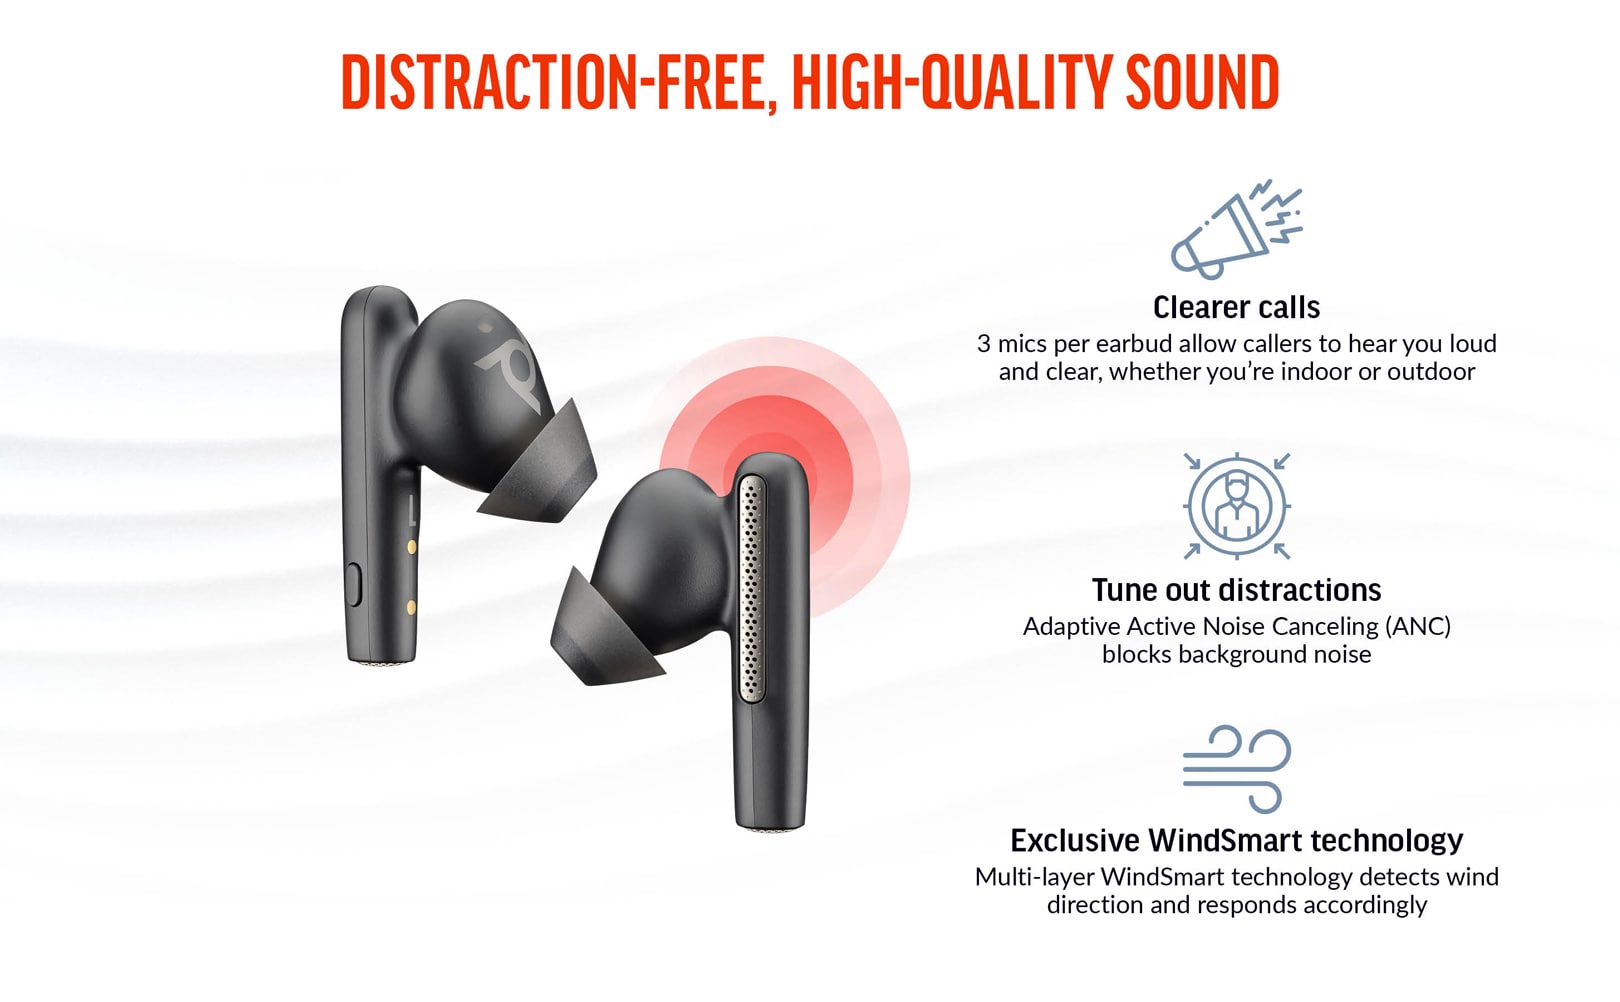 Distraction-free, high-quality sound